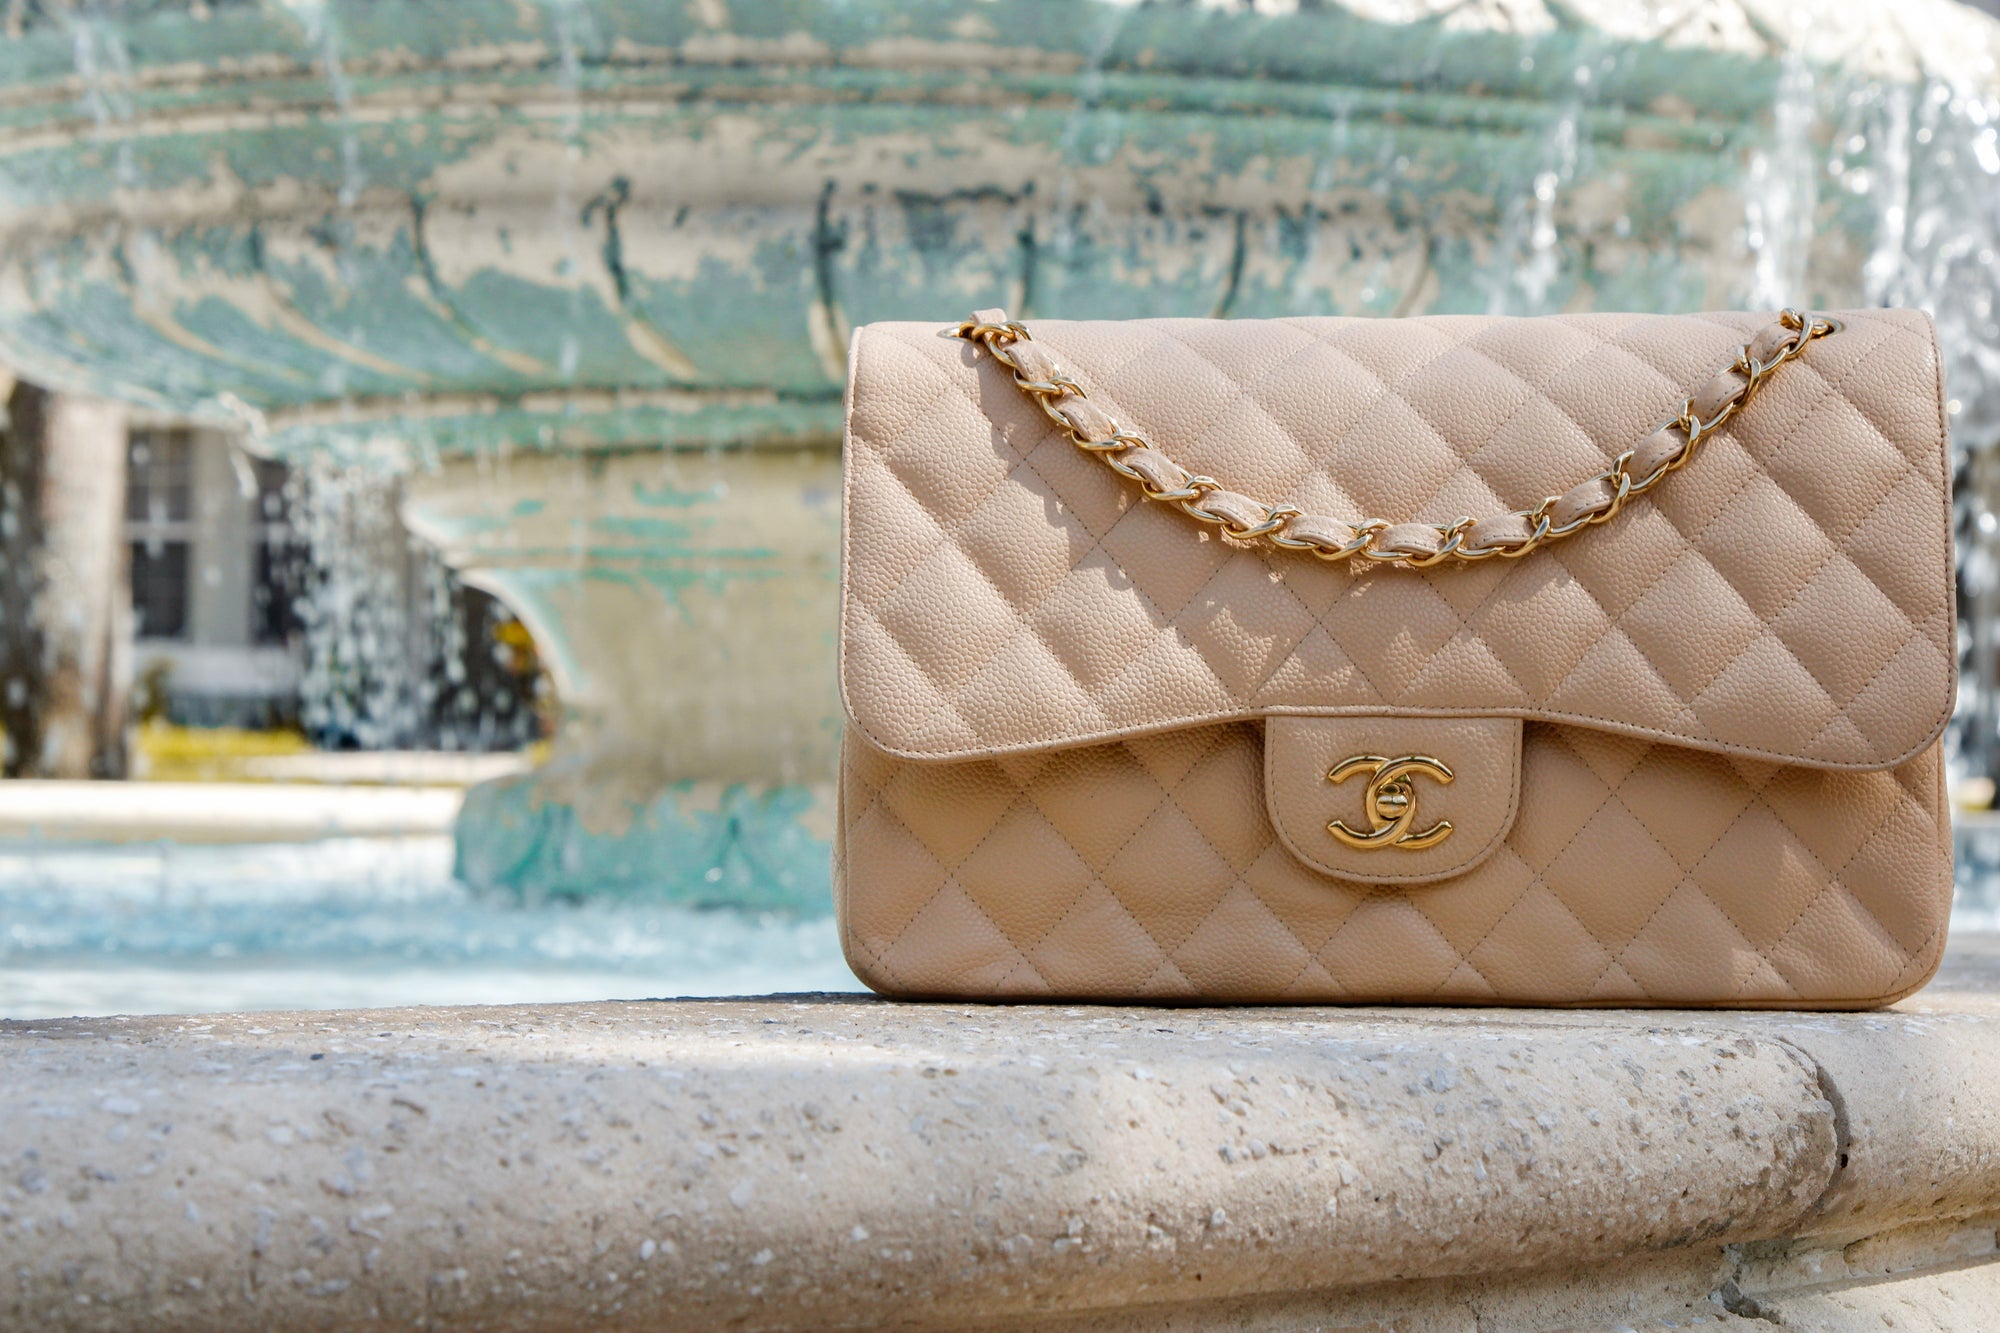 What is the Price of a Chanel Flap Bag?